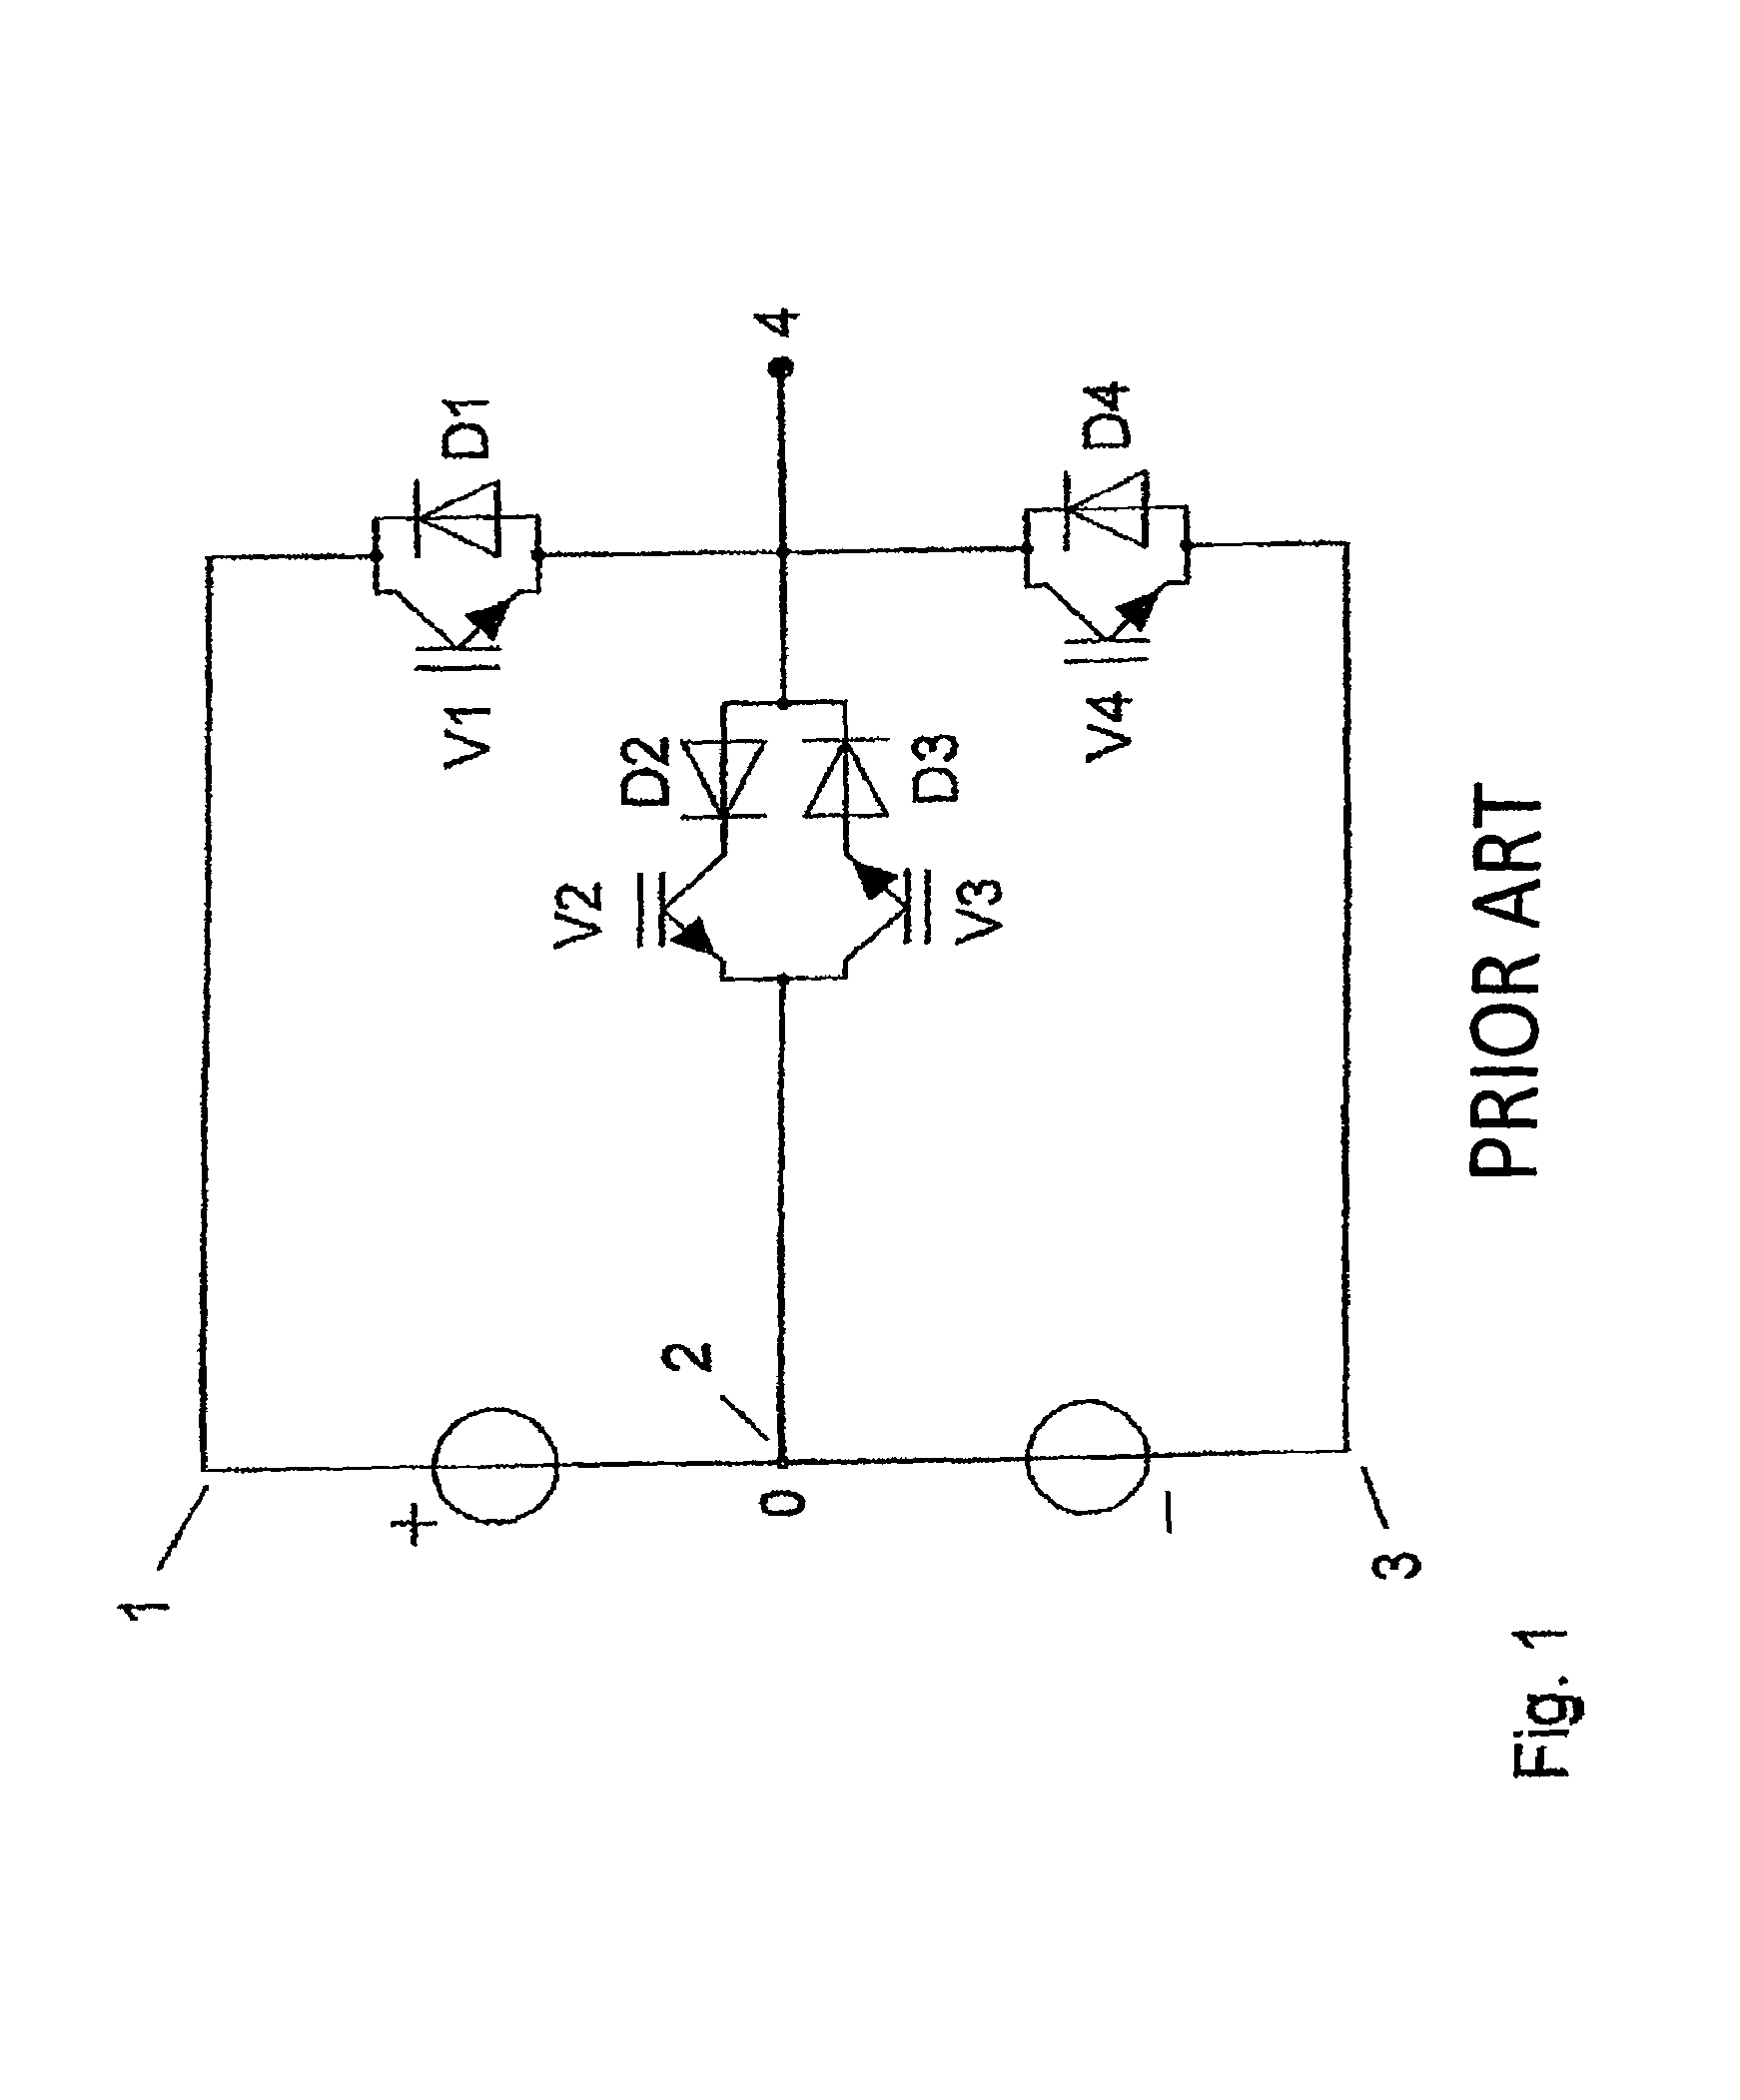 3-level pulse width modulation inverter with snubber circuit